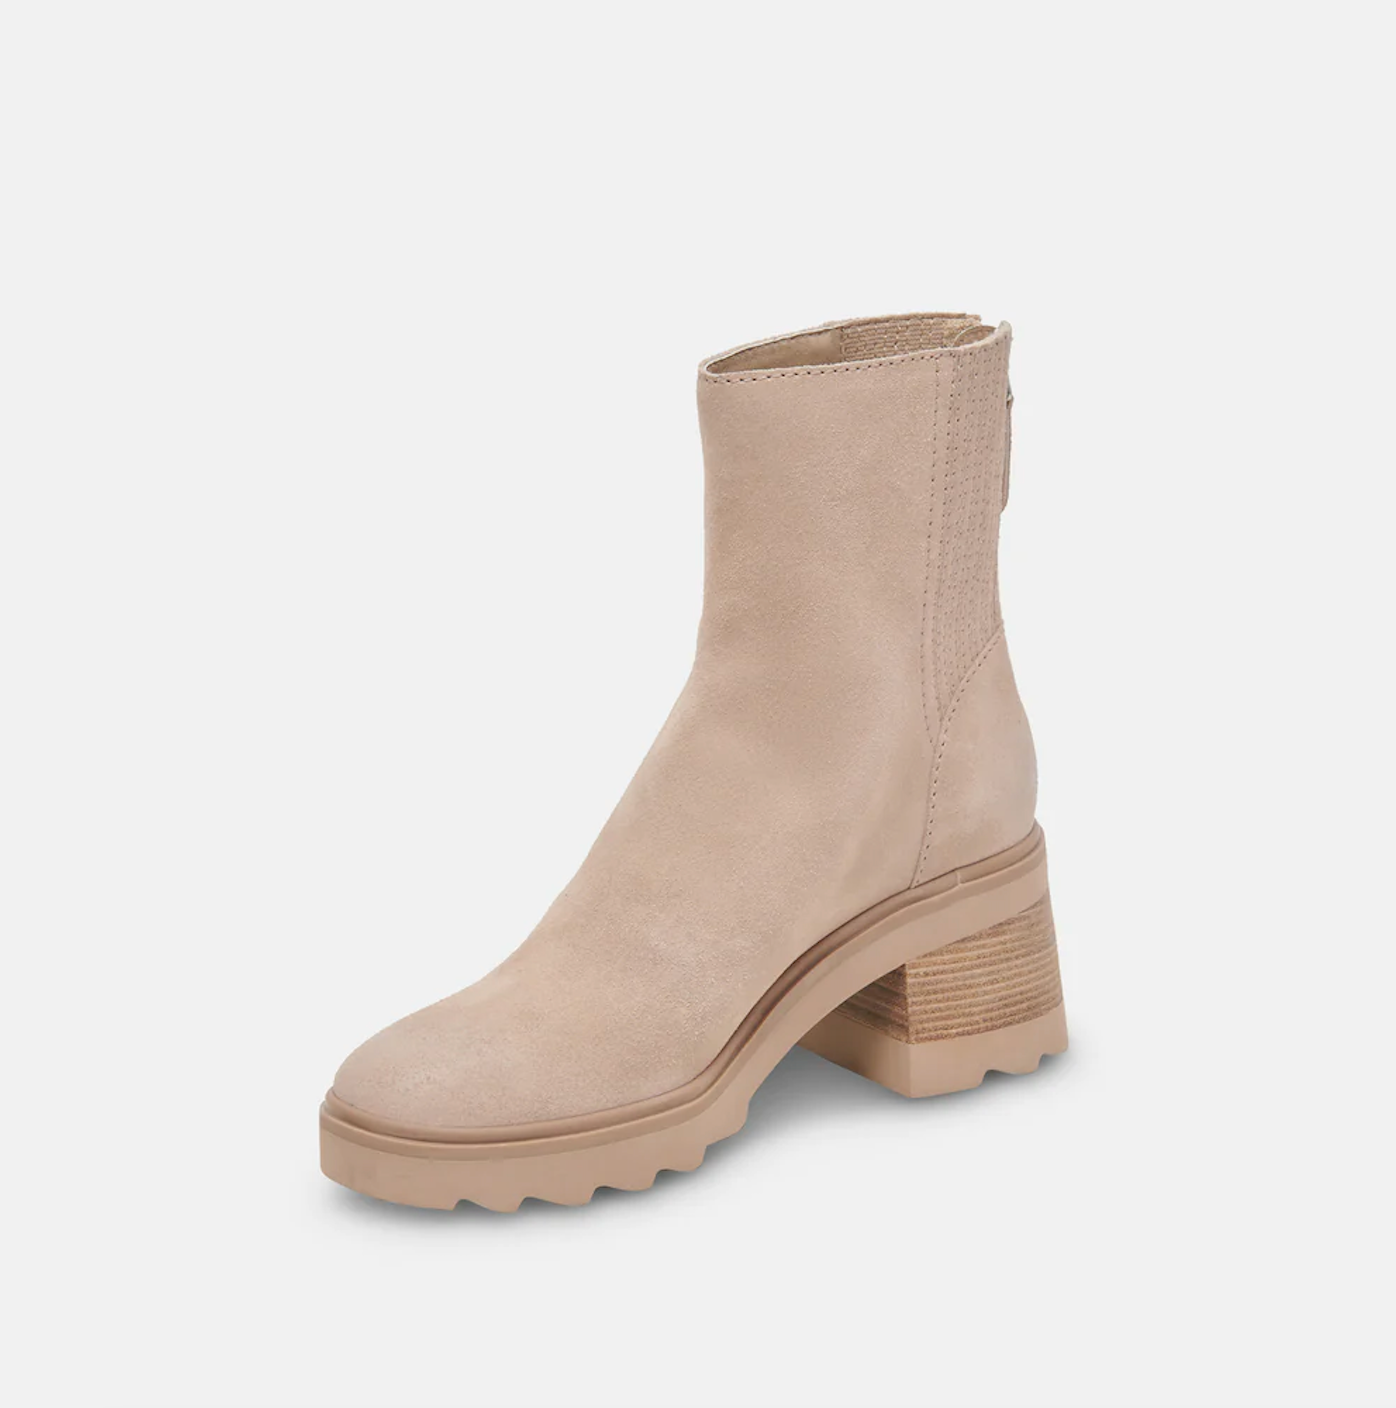 DOLCE VITA MARTEY H2O BOOTS IN TAUPE SUEDE